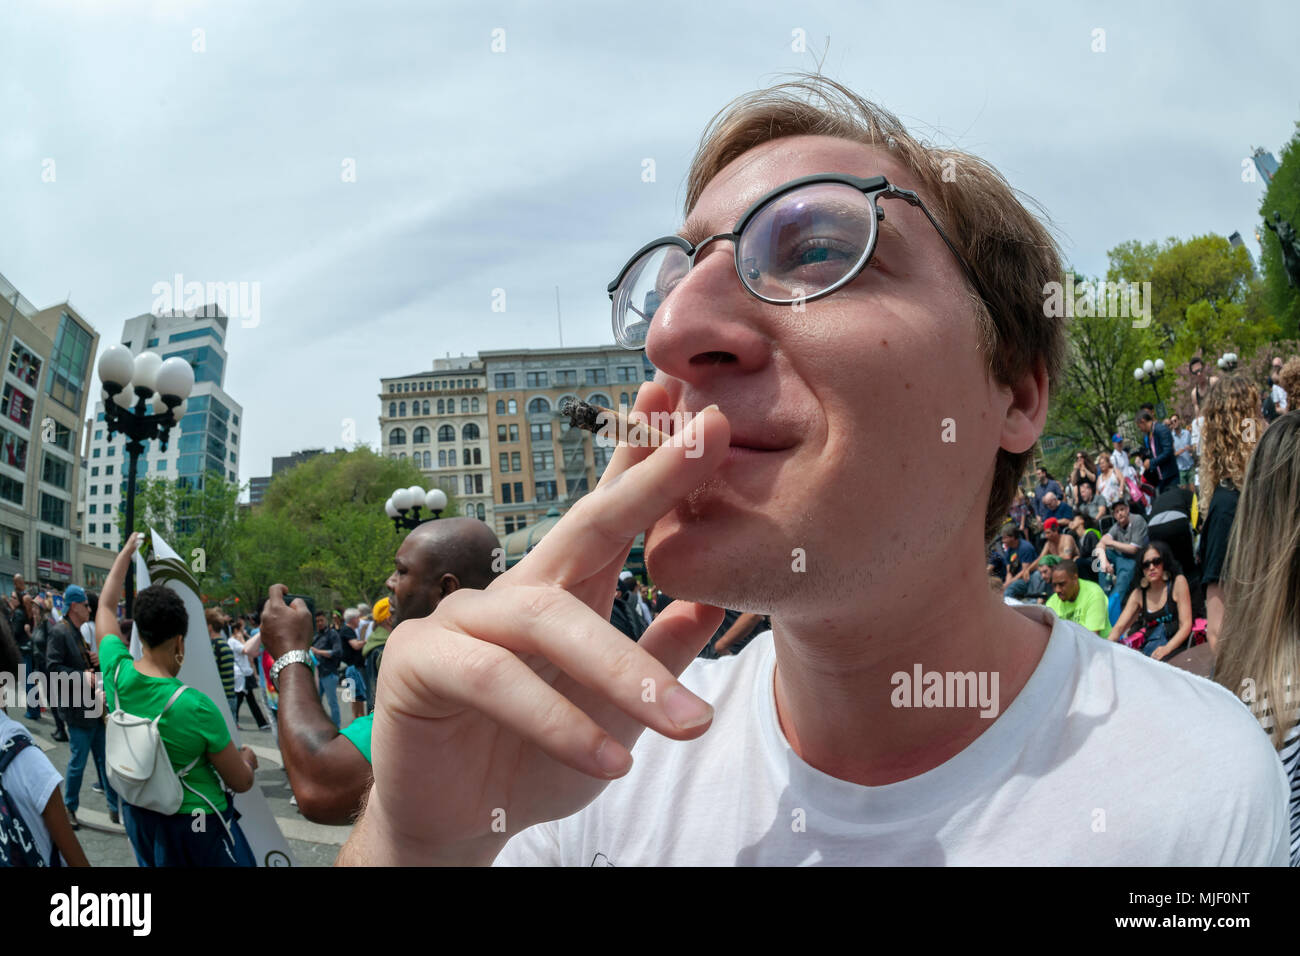 New York, USA. 5th May, 2018. Advocates for the legalization of marijuana at the rally in New York on Saturday, May 5, 2018 after the annual NYC Cannabis Parade. The march included a wide range of demographics from millennials to old-time hippies. The participants in the parade are calling for the legalization of marijuana for medical treatment and for recreational uses. (© Richard B. Levine) Credit: Richard Levine/Alamy Live News Stock Photo